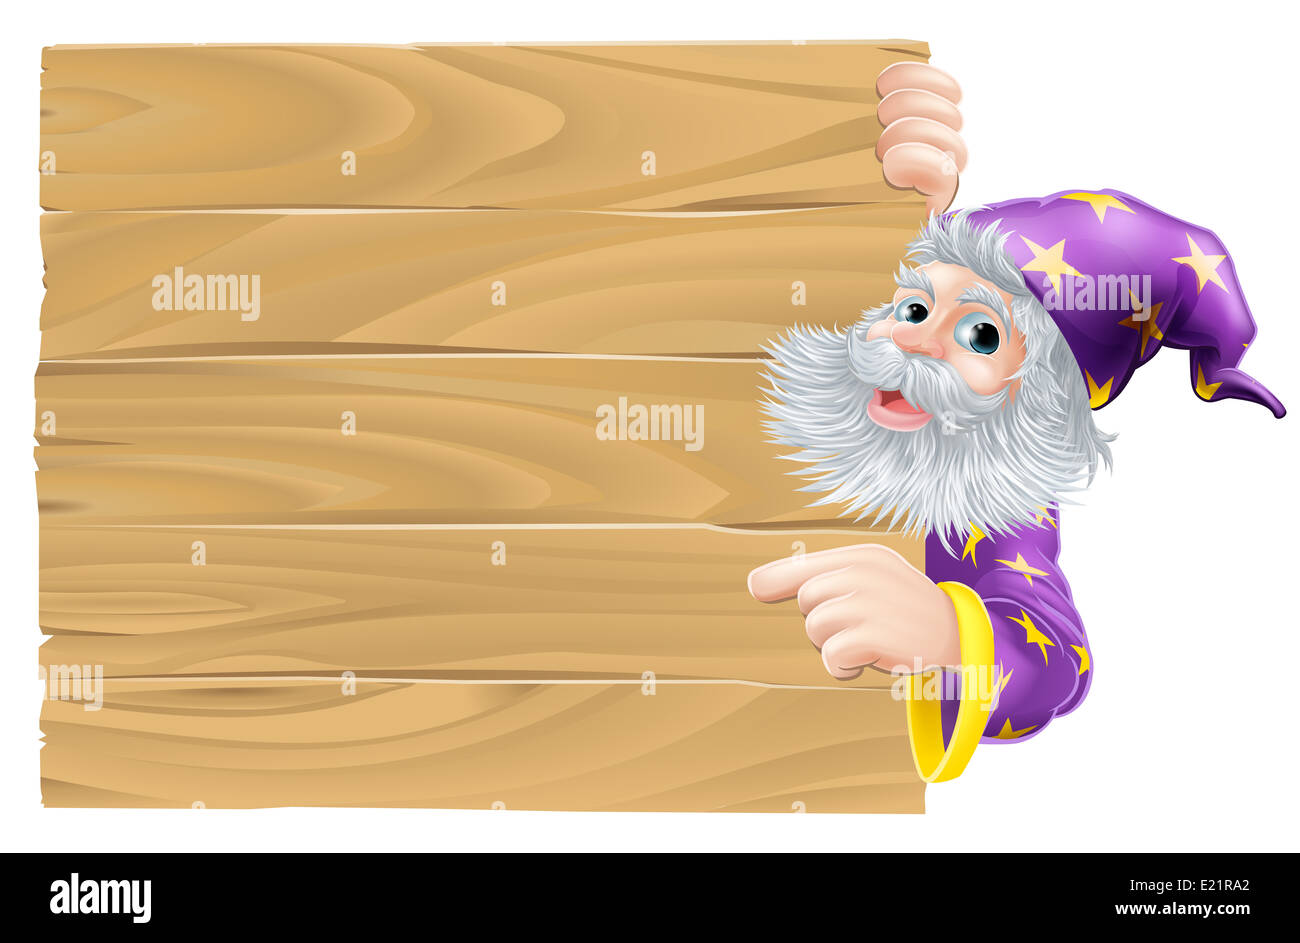 Cartoon wizard pointing sign, a kindly wizard in purple robes with stars pointing at a sign Stock Photo